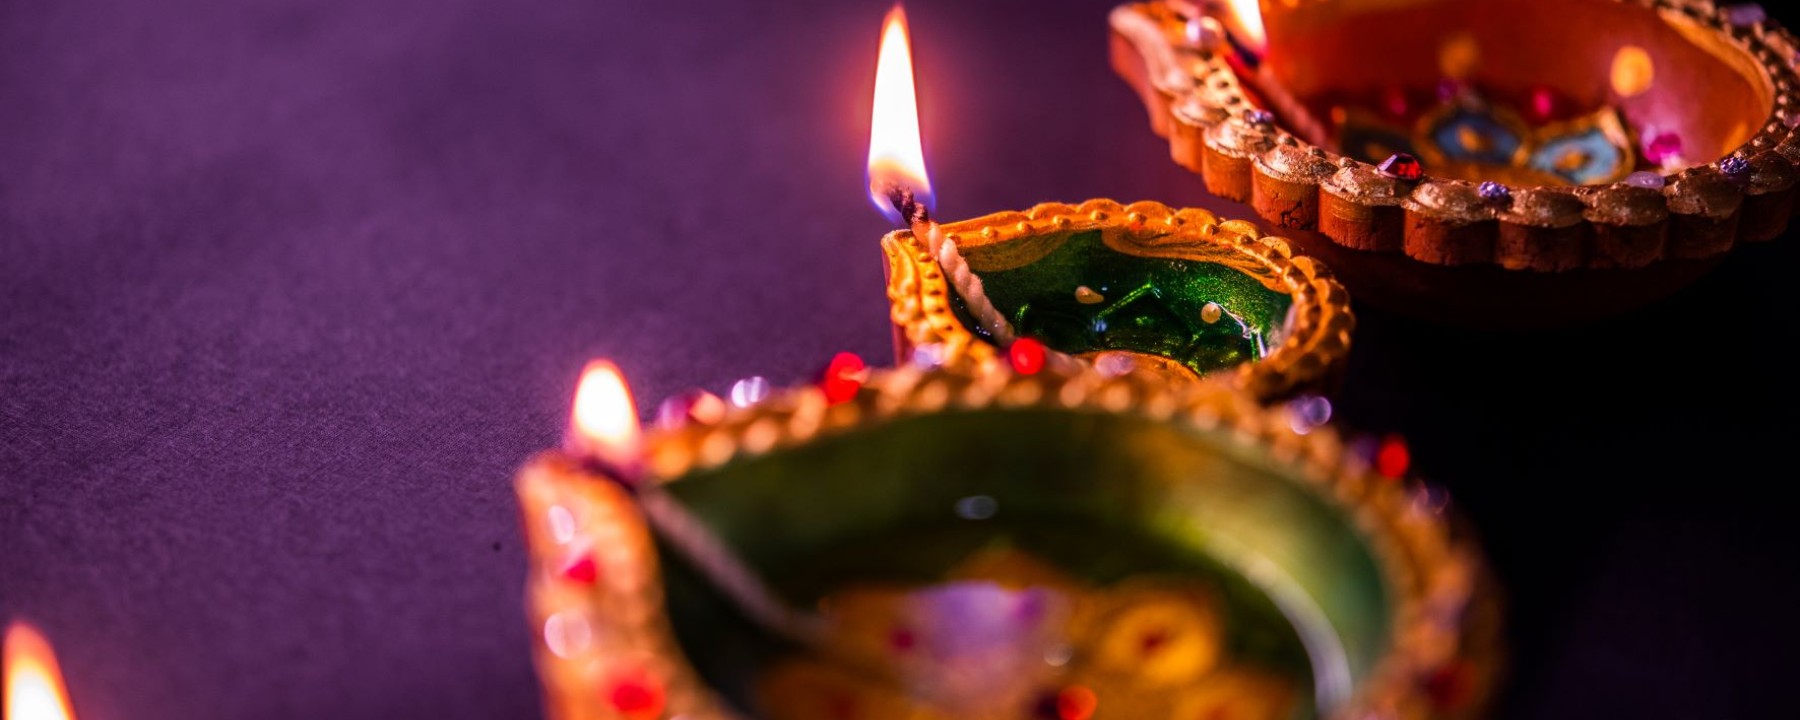 DEEPAVALI - Festival customs and traditions